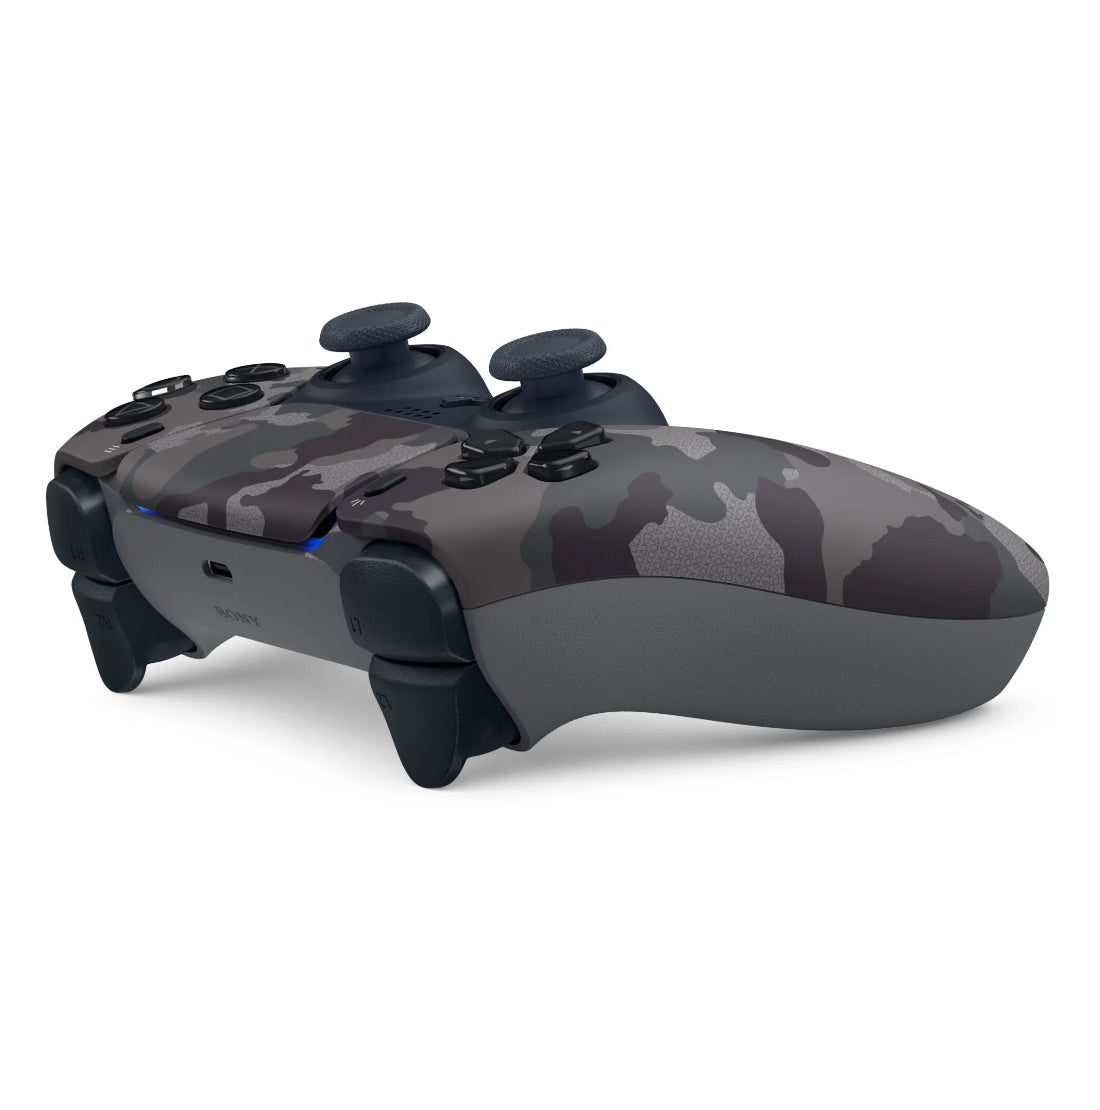 Sony Playstation 5 Digital Edition Bundle with Extra Gray Camo Controller, Black PULSE 3D Wireless Headset and Trigger Kit - Pro-Distributing